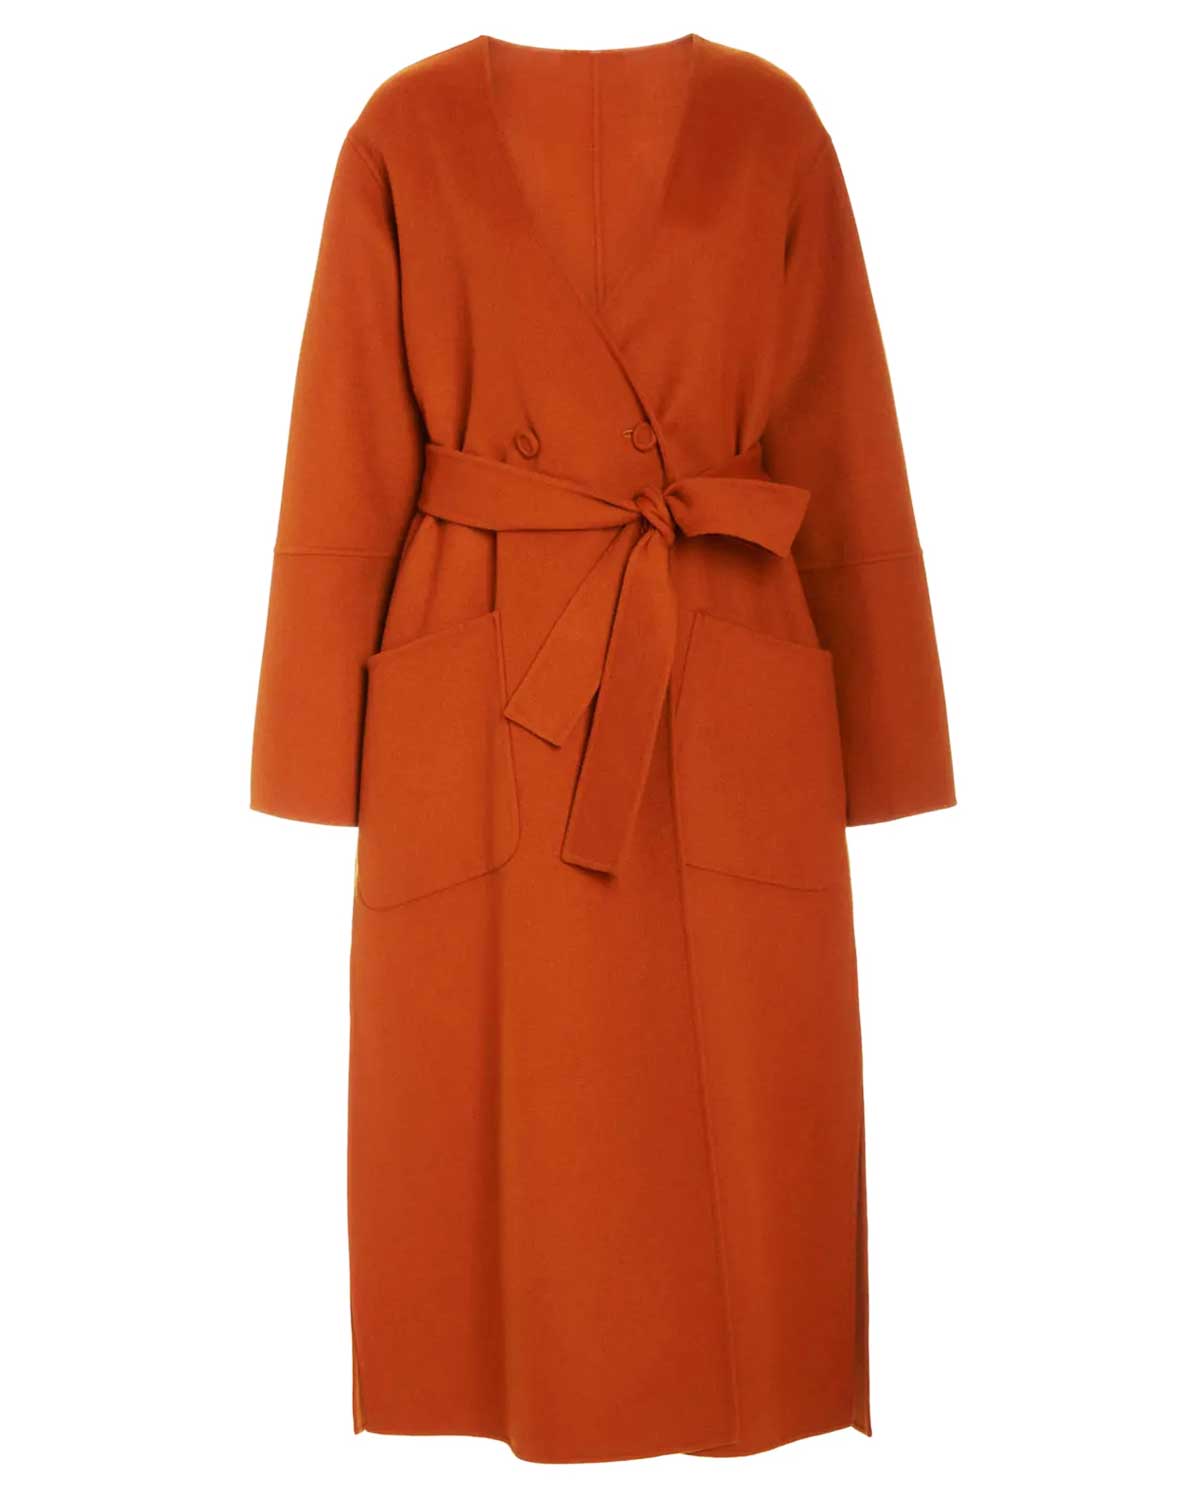 Sienna Miller Anatomy of a Scandal Sophie Whitehouse Wool Coat